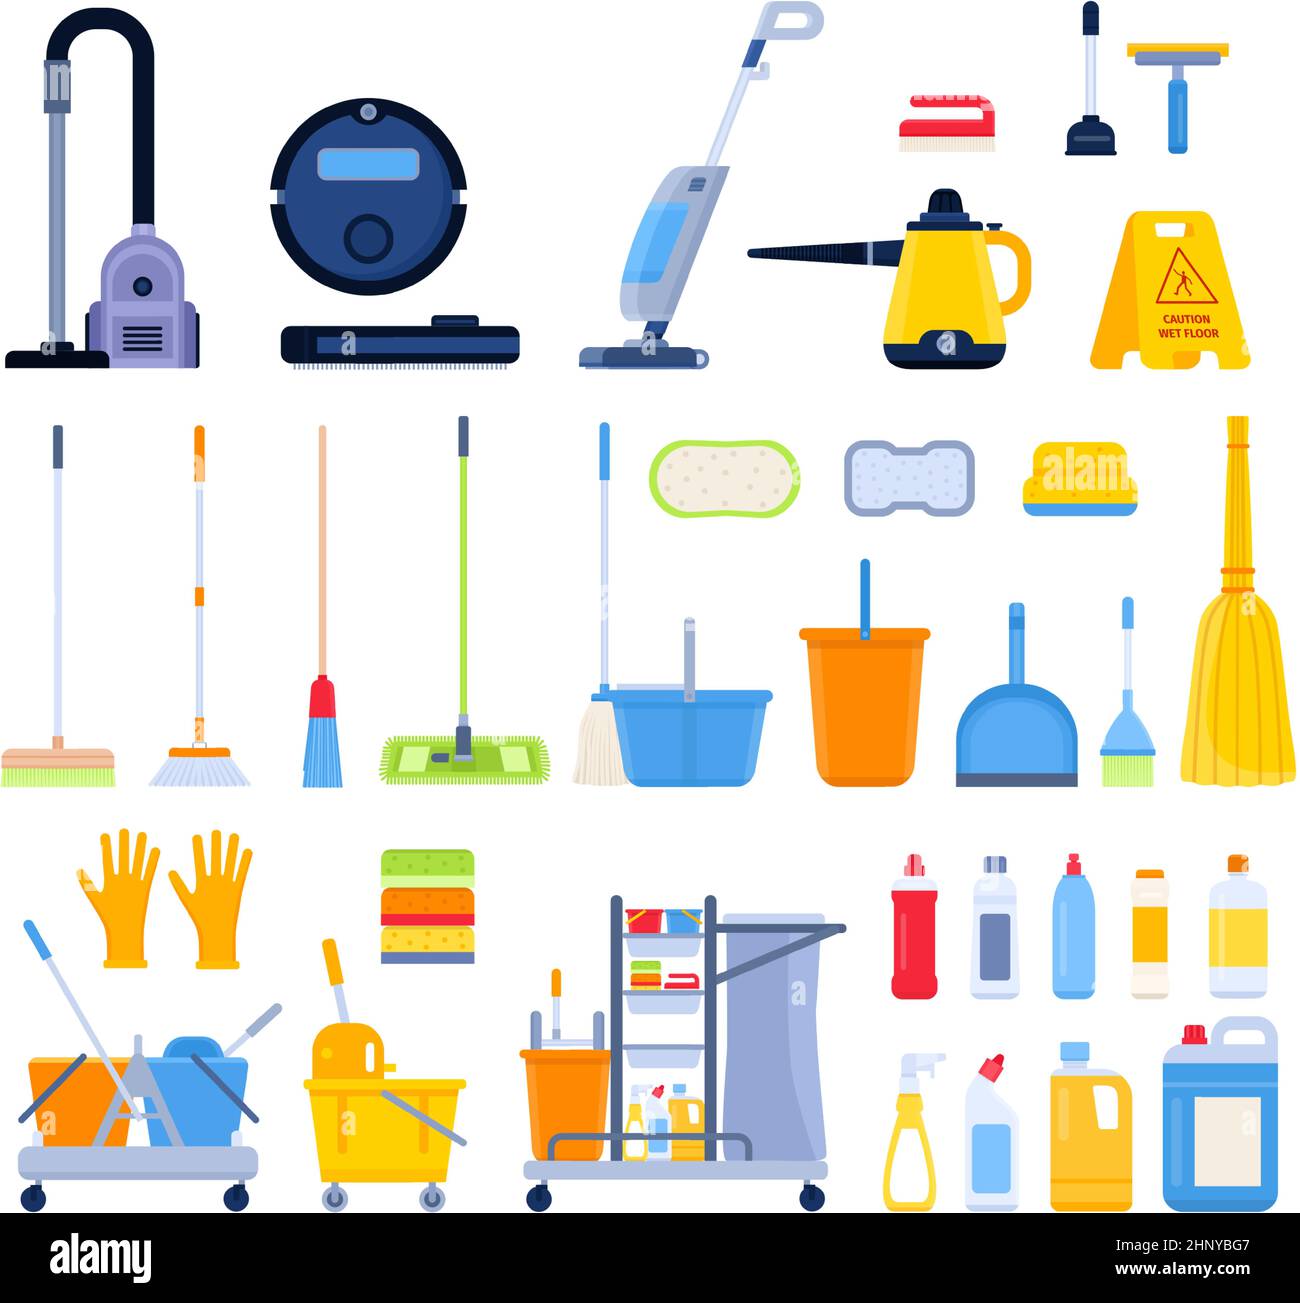 Flat cleaning tools, brooms, rags, brushes and detergent bottles. Household vacuum cleaner, steam mop, buckets, sponges and wipes vector set. Equipmen Stock Vector